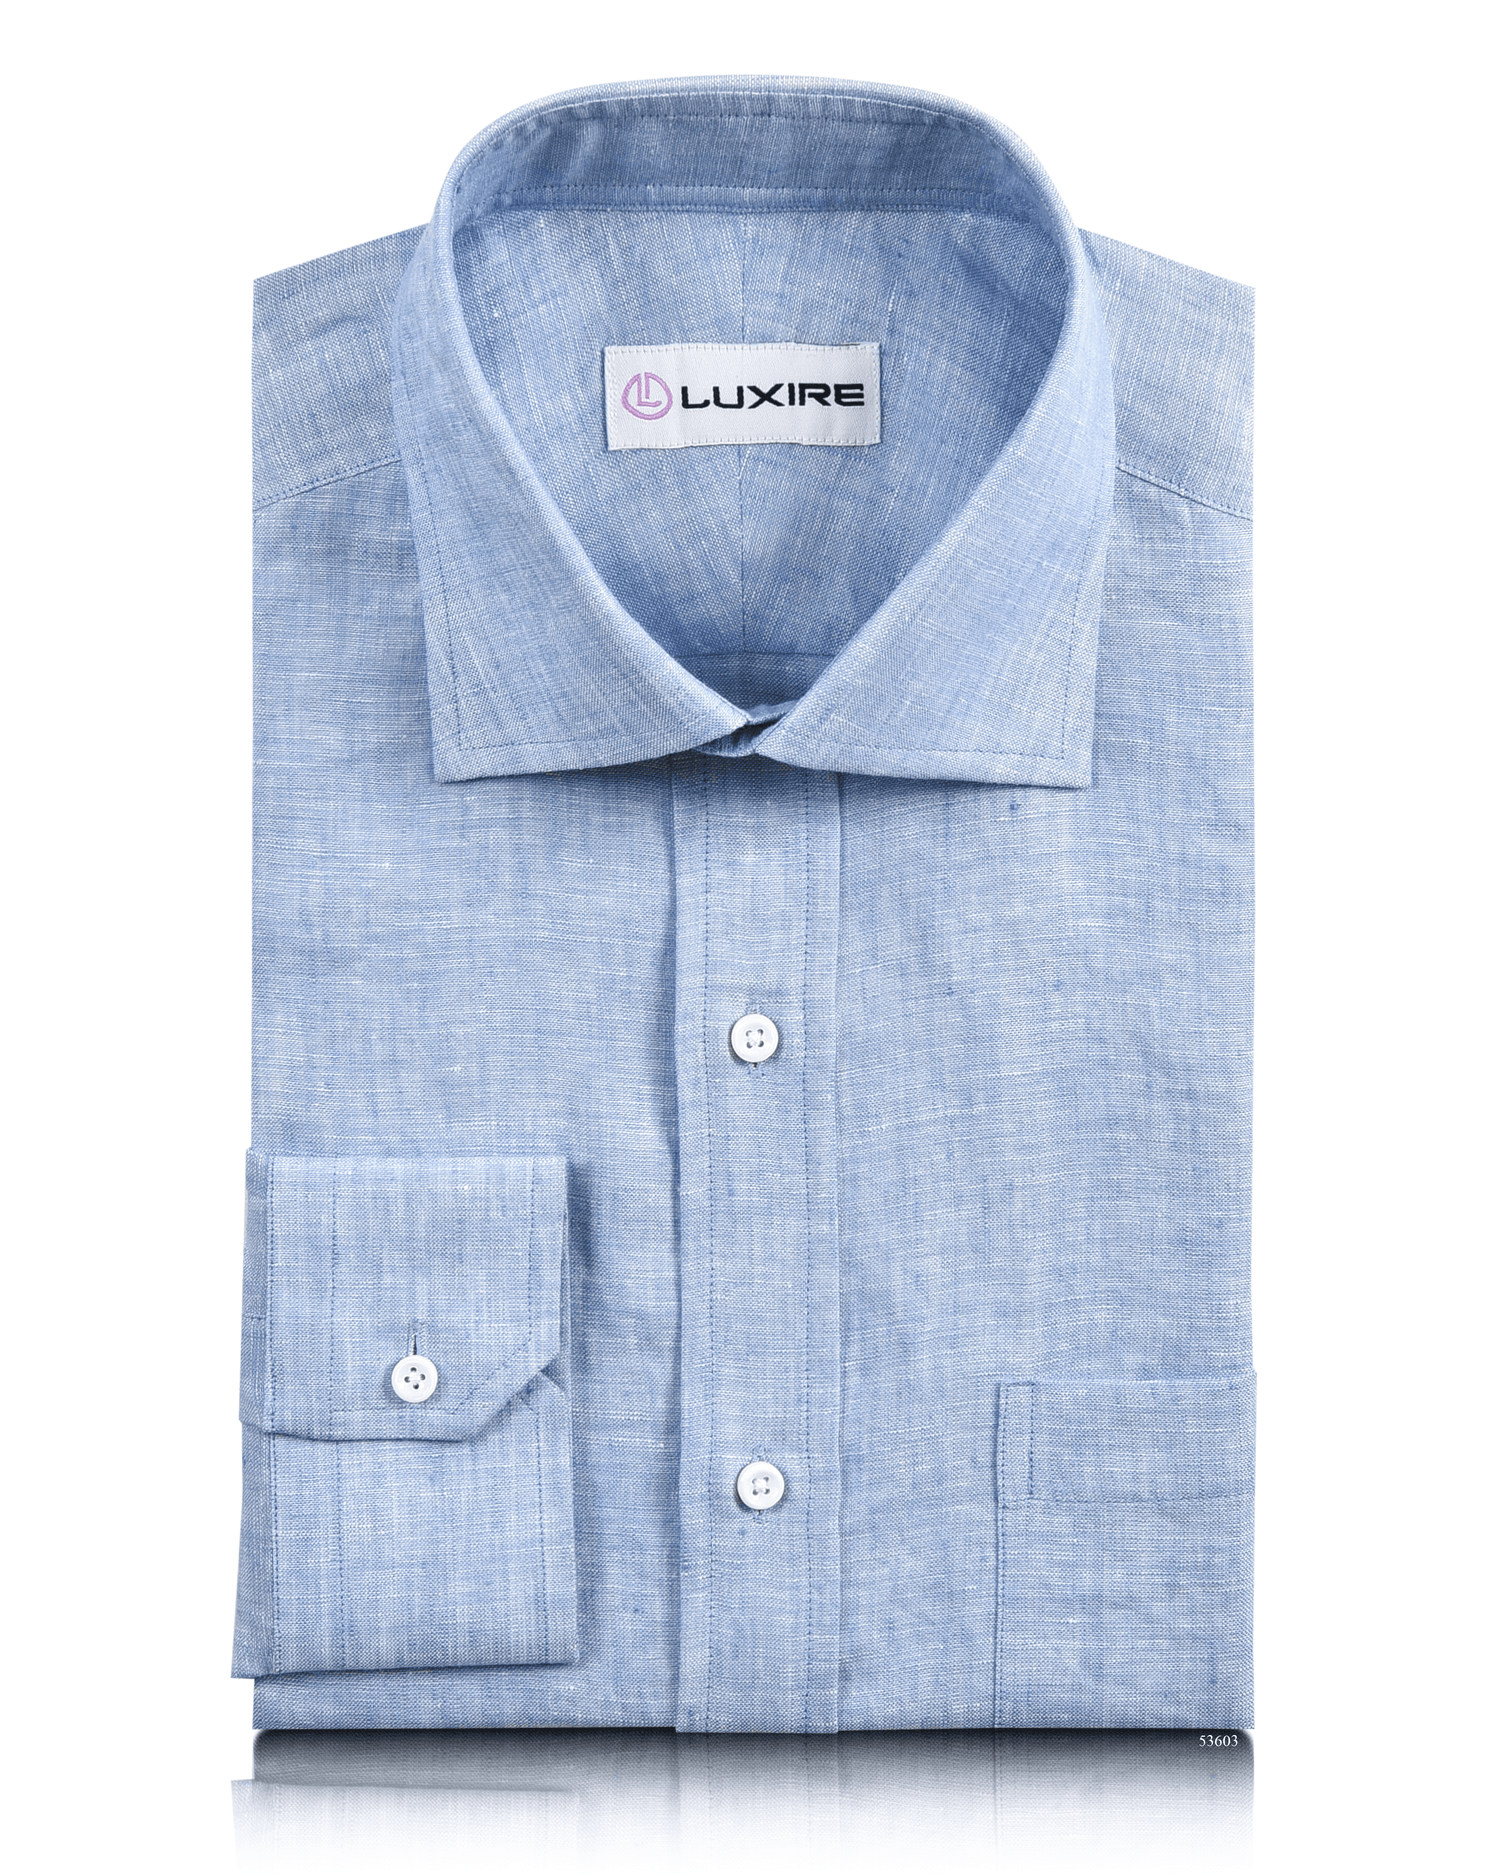 Front of the custom linen shirt for men in light blue chambray by Luxire Clothing